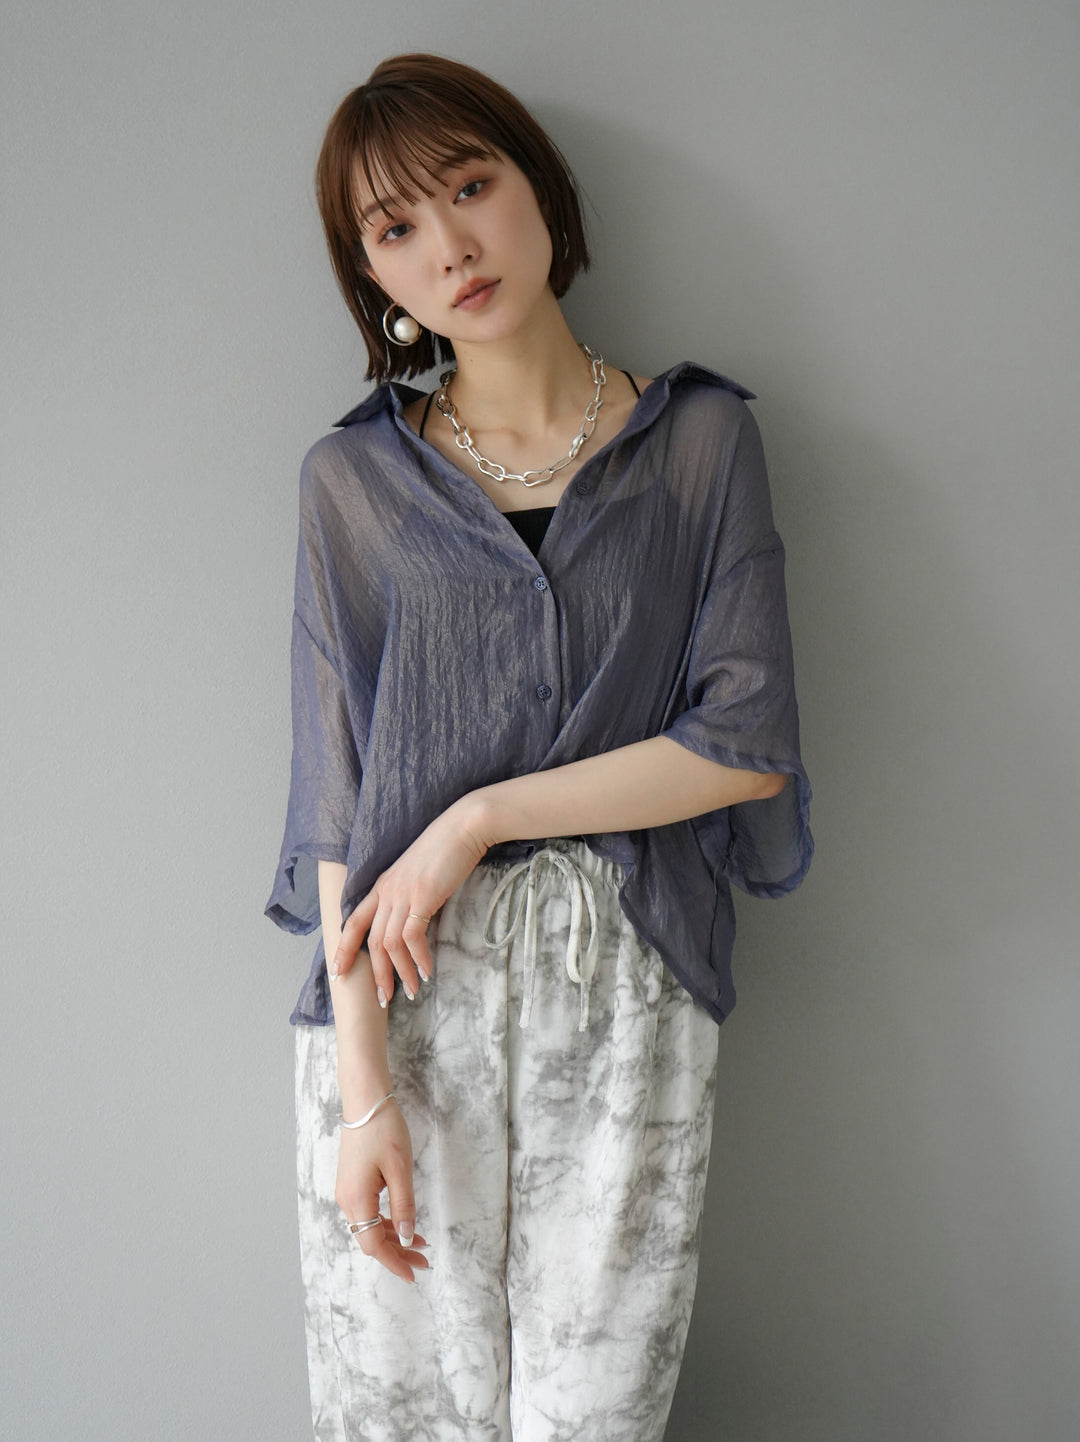 [SET] Lame washer sheer half shirt + double strap cut rib bra camisole + nuance print washer easy pants (3 sets)